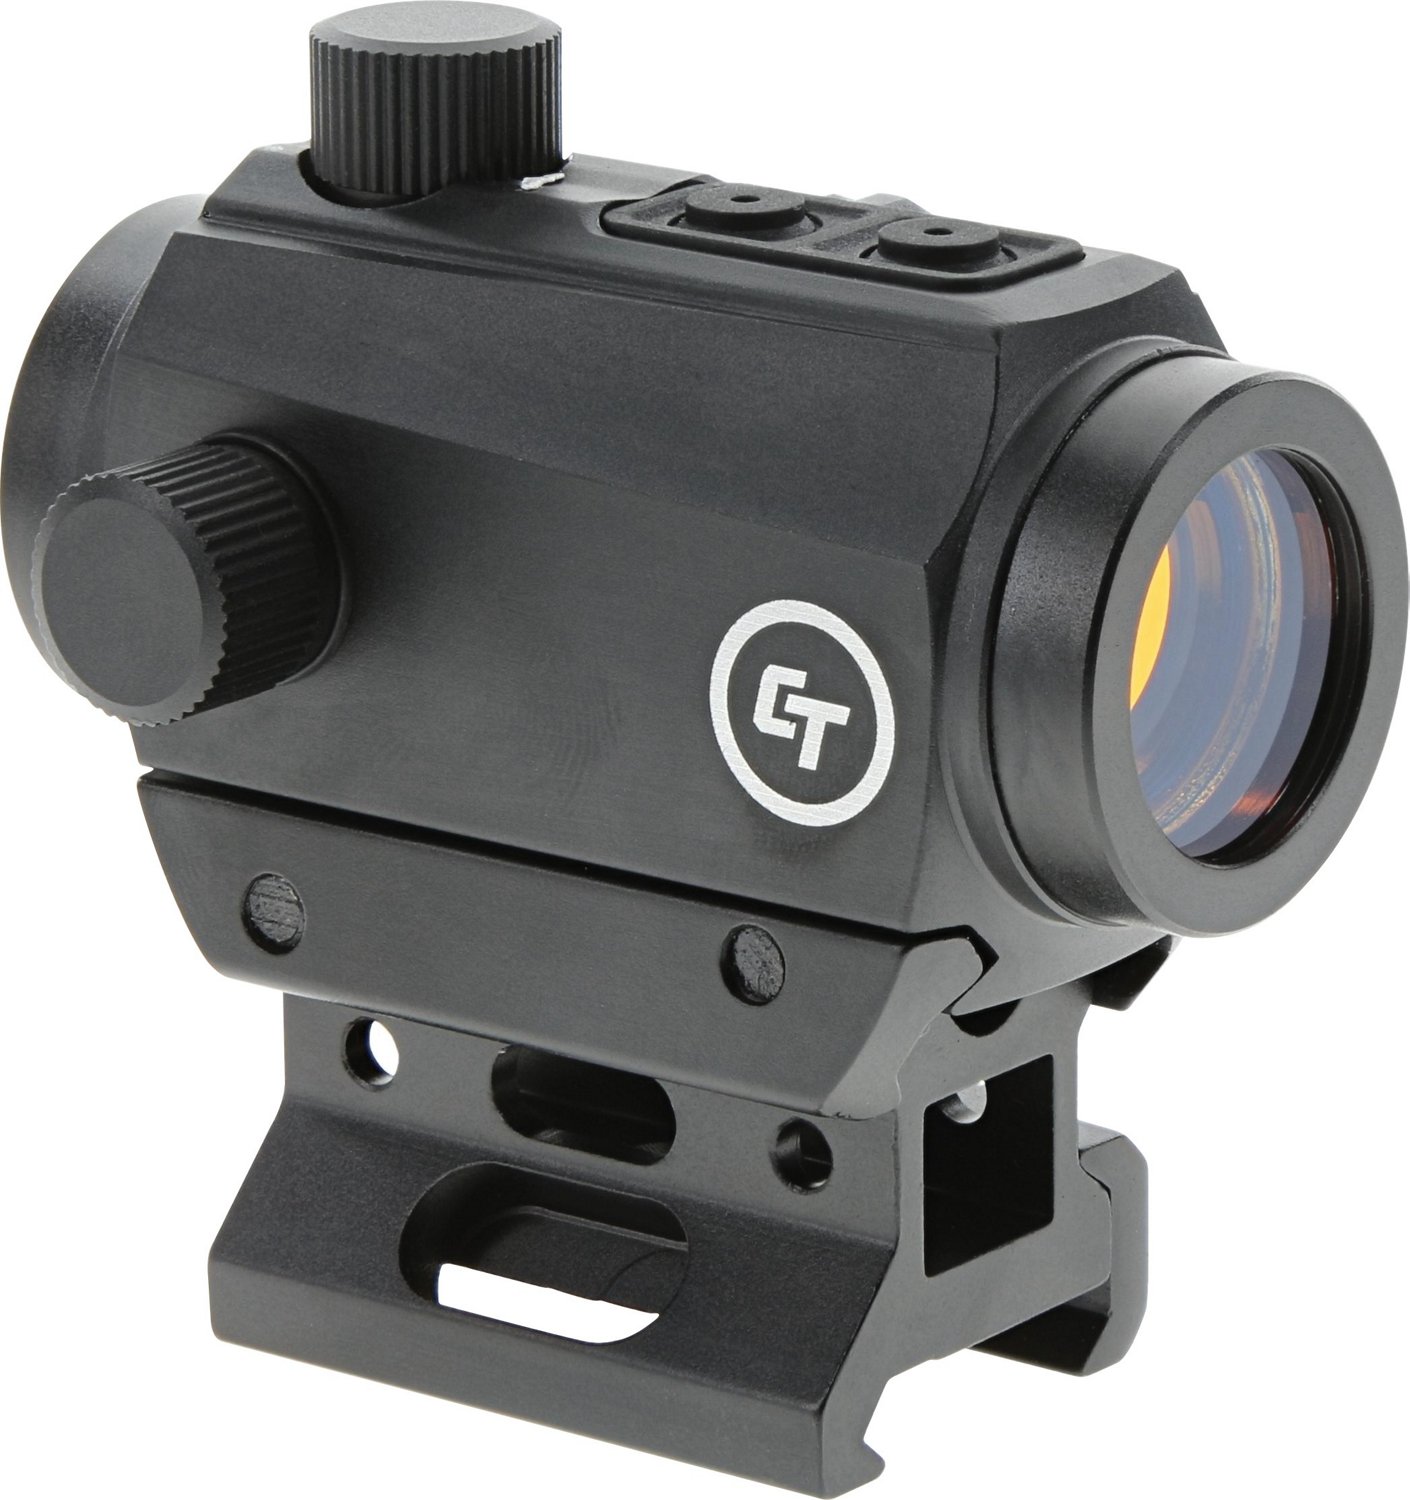 Crimson Trace CTS-25 Compact Red Dot Sight                                                                                       - view number 1 selected